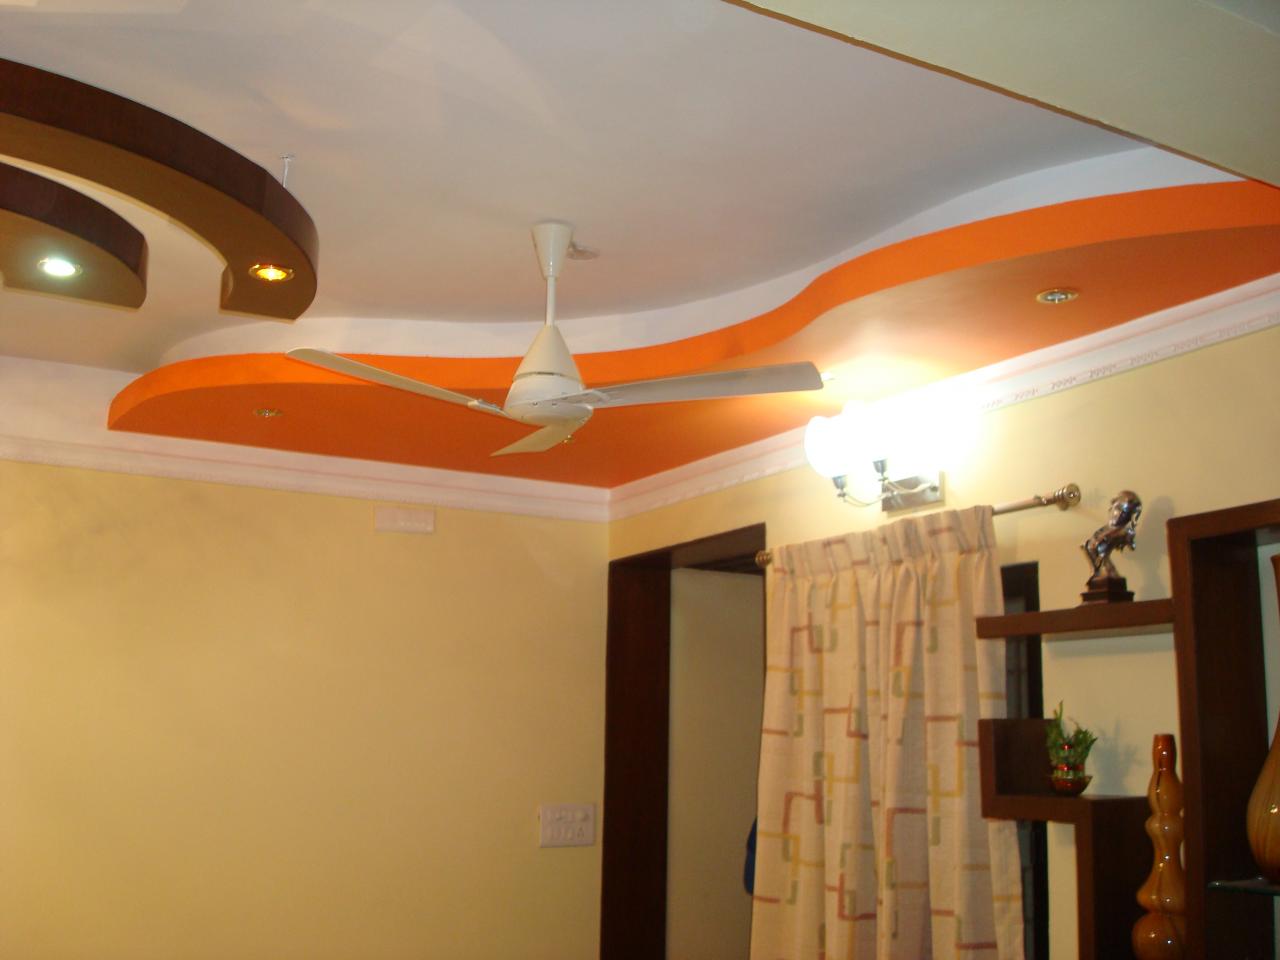 For Ceiling Designs Home - Home Garden Decoration